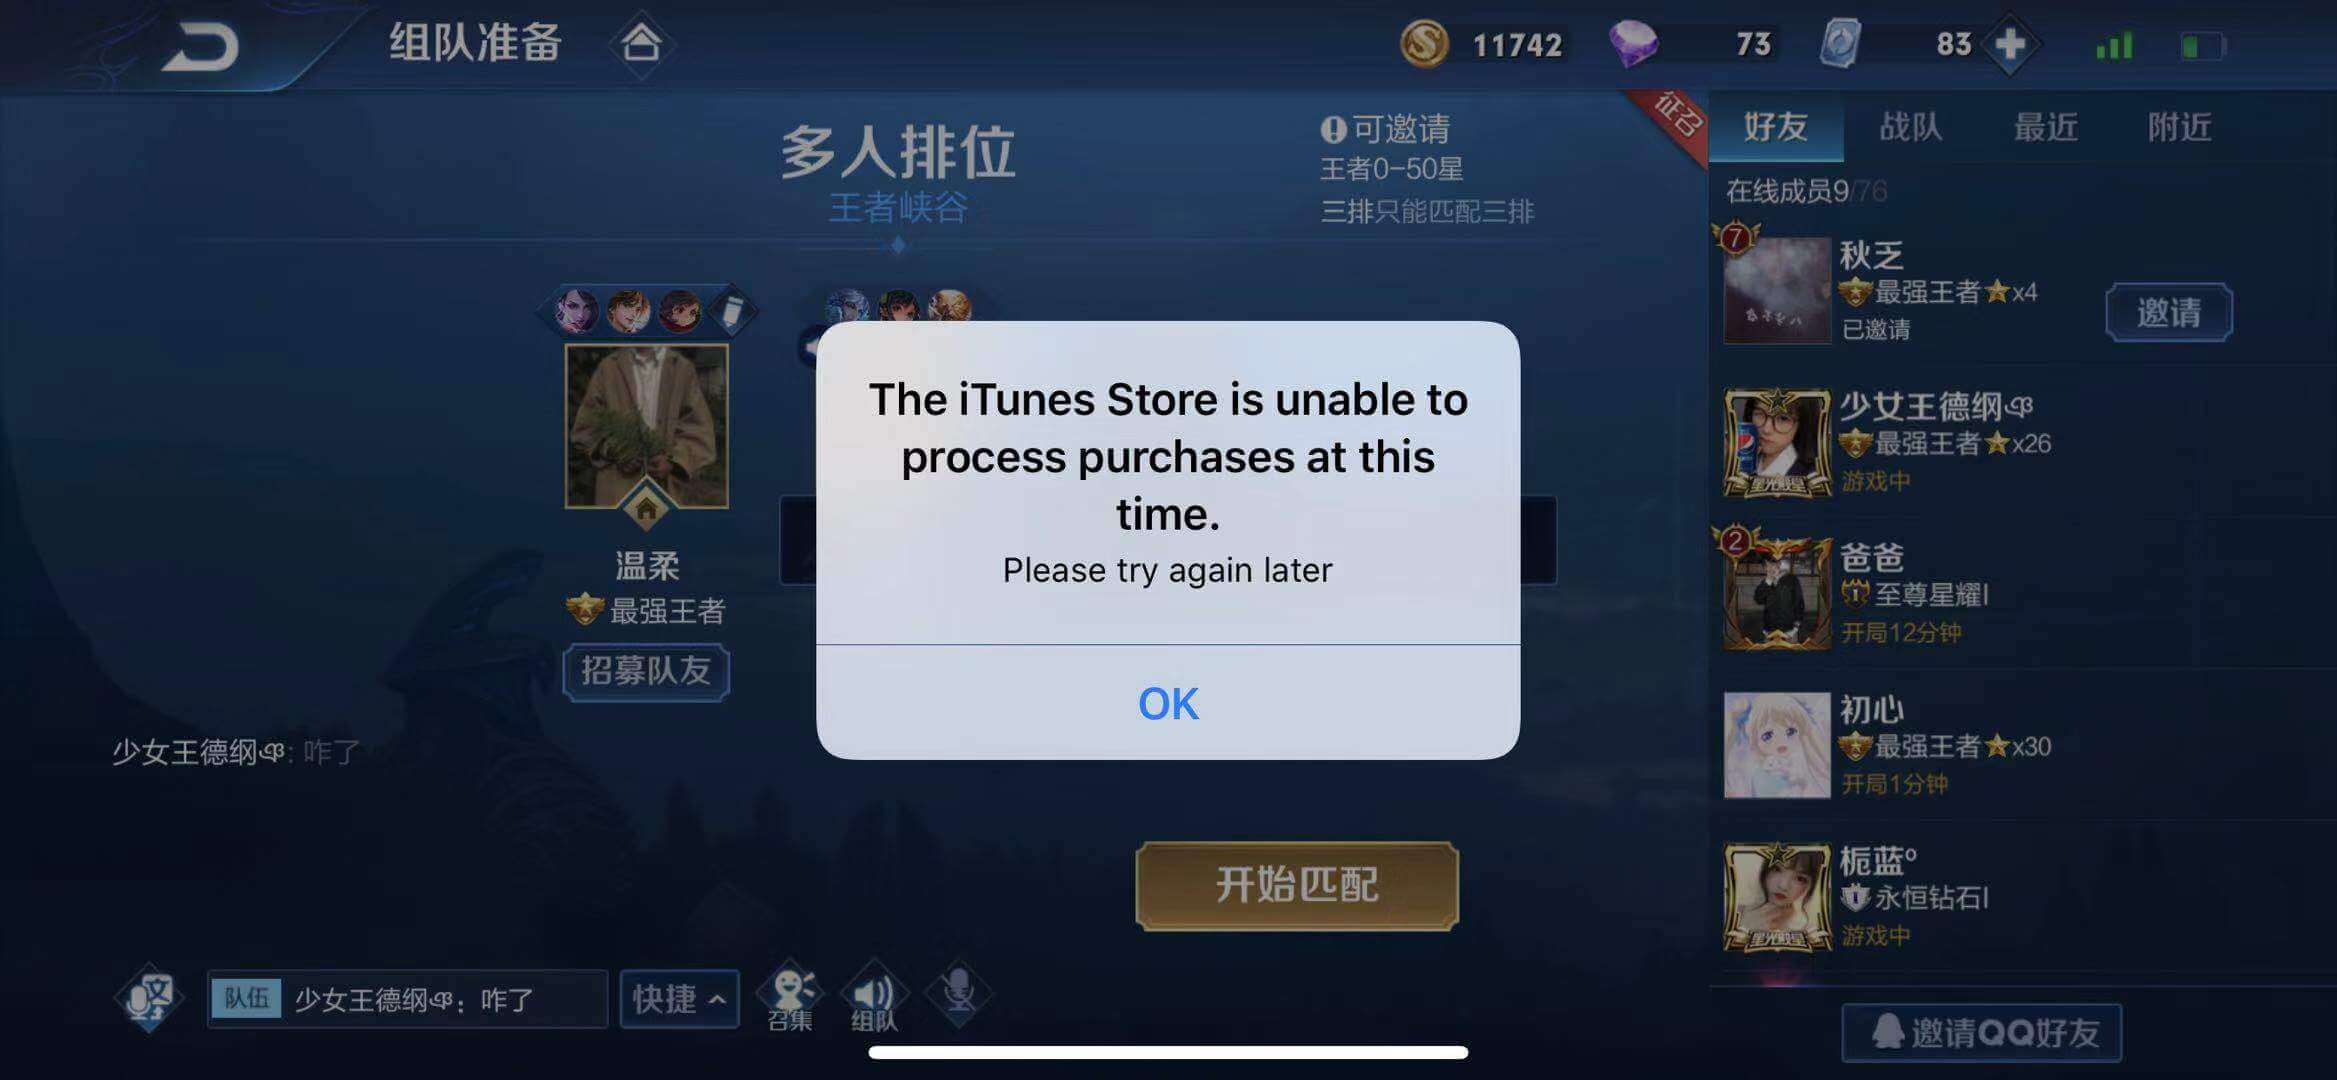 The iTunes Store is unable to process purchases at this time.